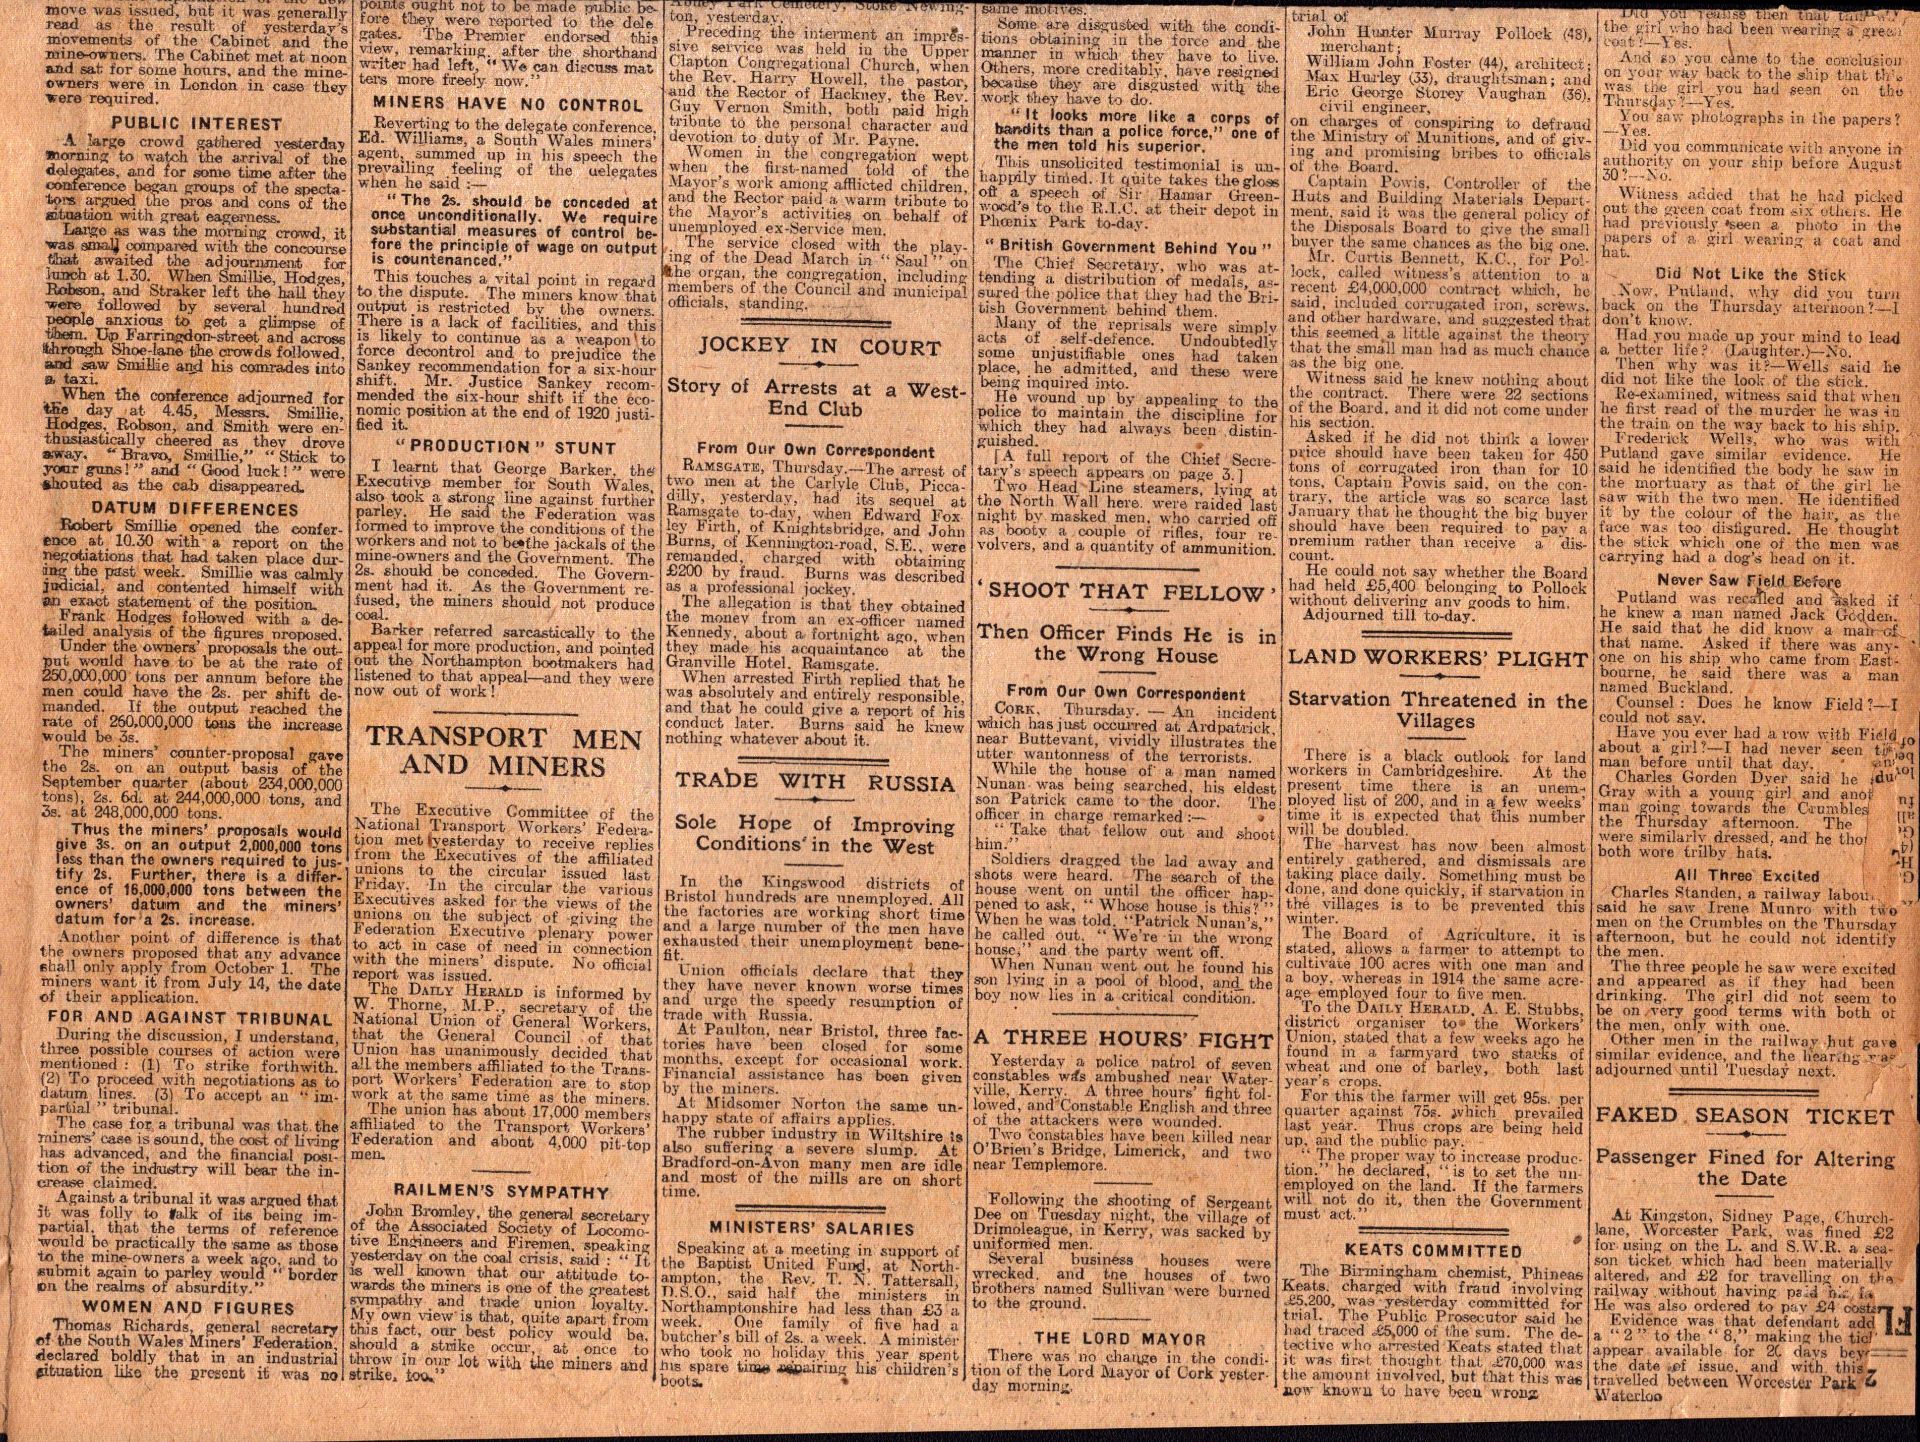 Irish War of Independence News Reports Black & Tans, Hunger Strikes 1920-1. - Image 2 of 7